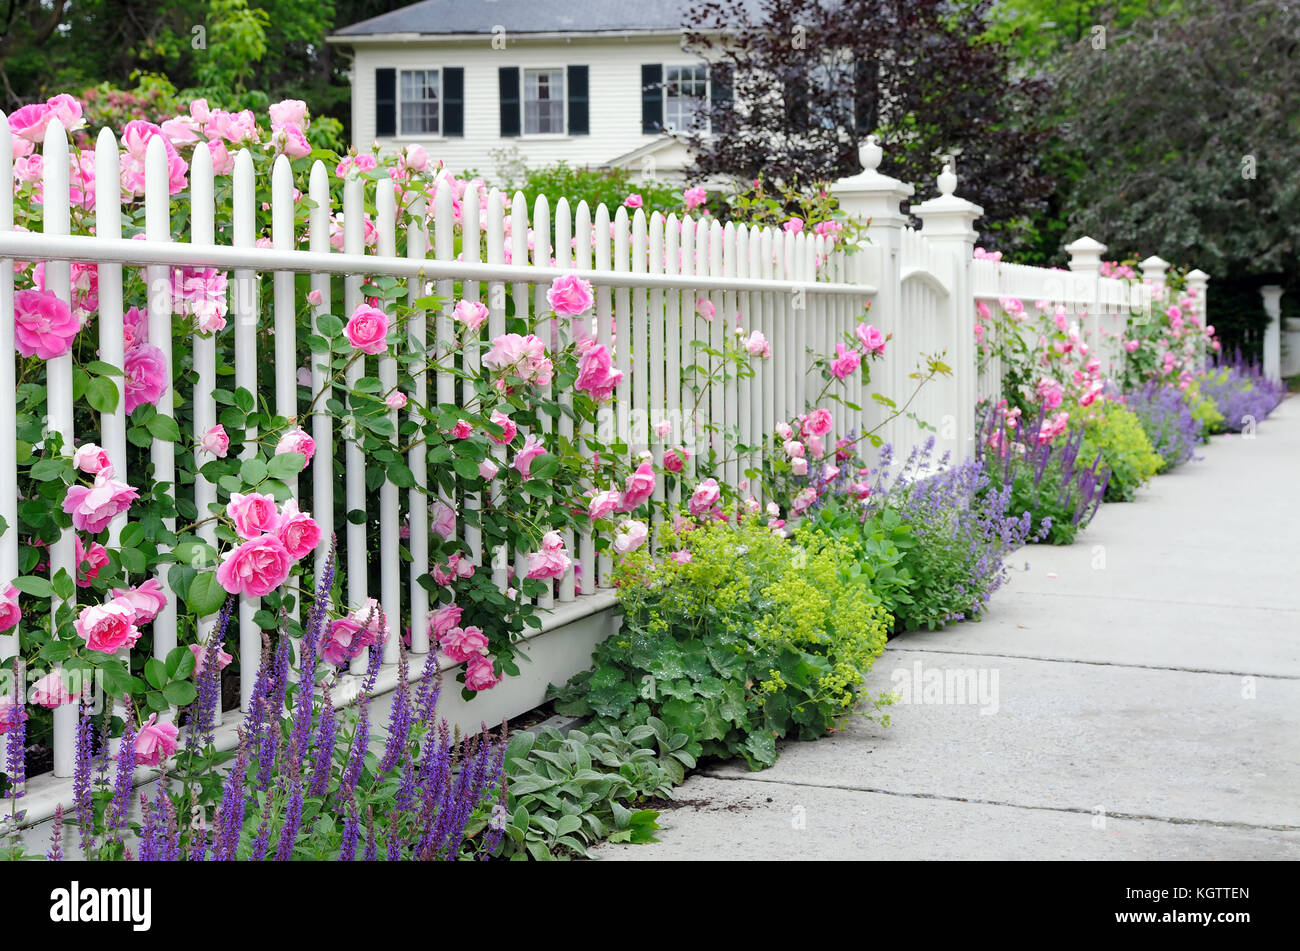 Climbing roses on fence and colorful garden border. White picket fence, pink, blue, green and purple flowers. Stock Photo